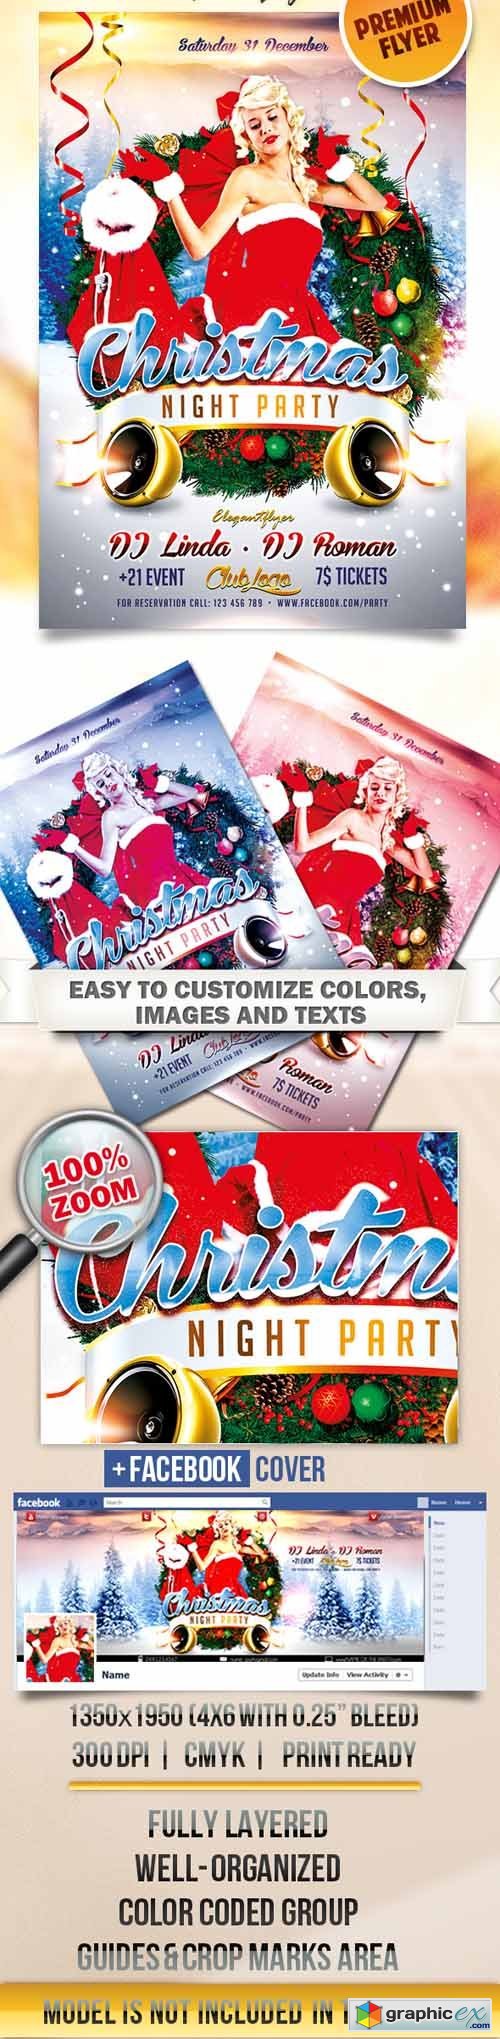 Christmas Night Party  Flyer PSD Template + Facebook Cover